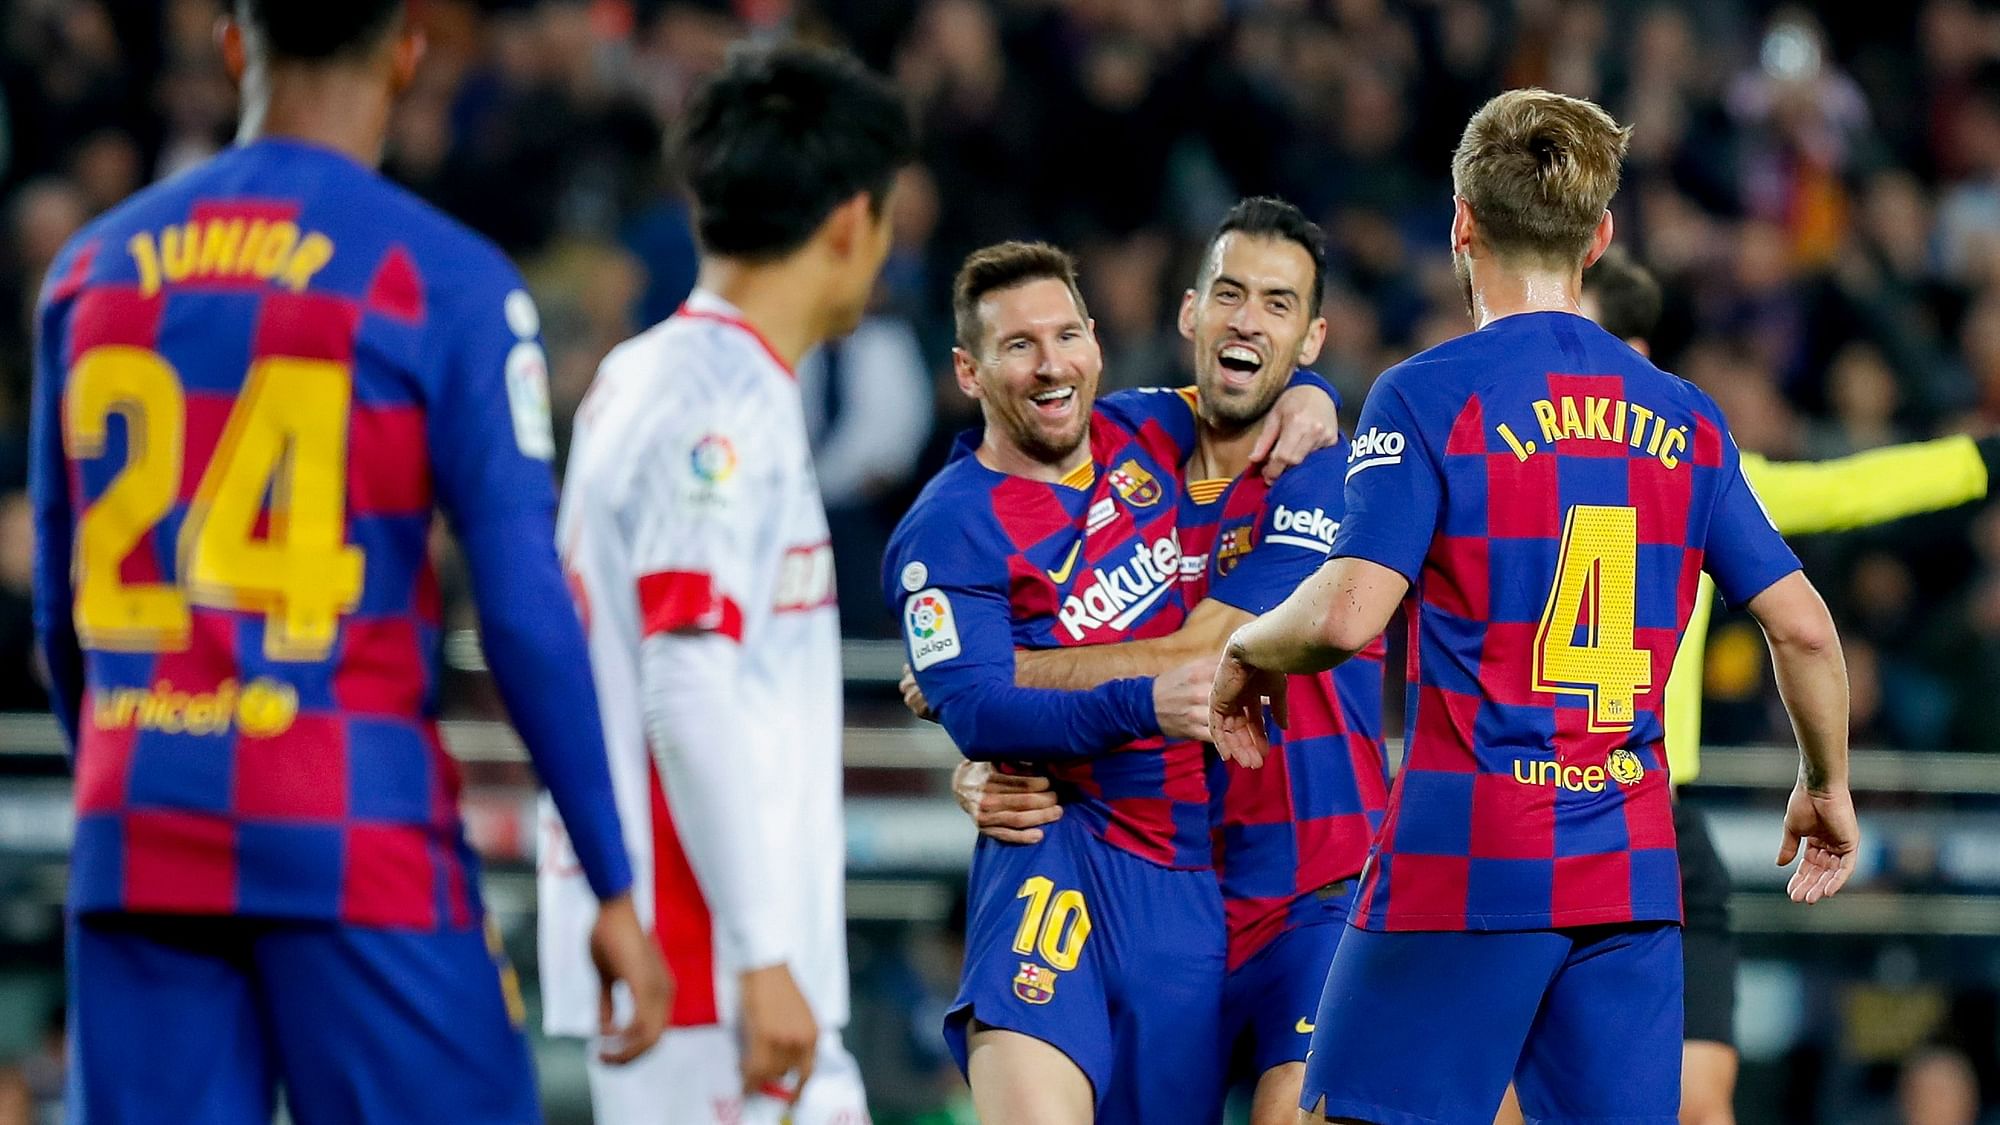 Barcelona’s Lionel Messi, center left, celebrates with Sergio Busquets after scoring his side’s second goal during a Spanish La Liga soccer match between Barcelona and Mallorca at Camp Nou stadium in Barcelona.